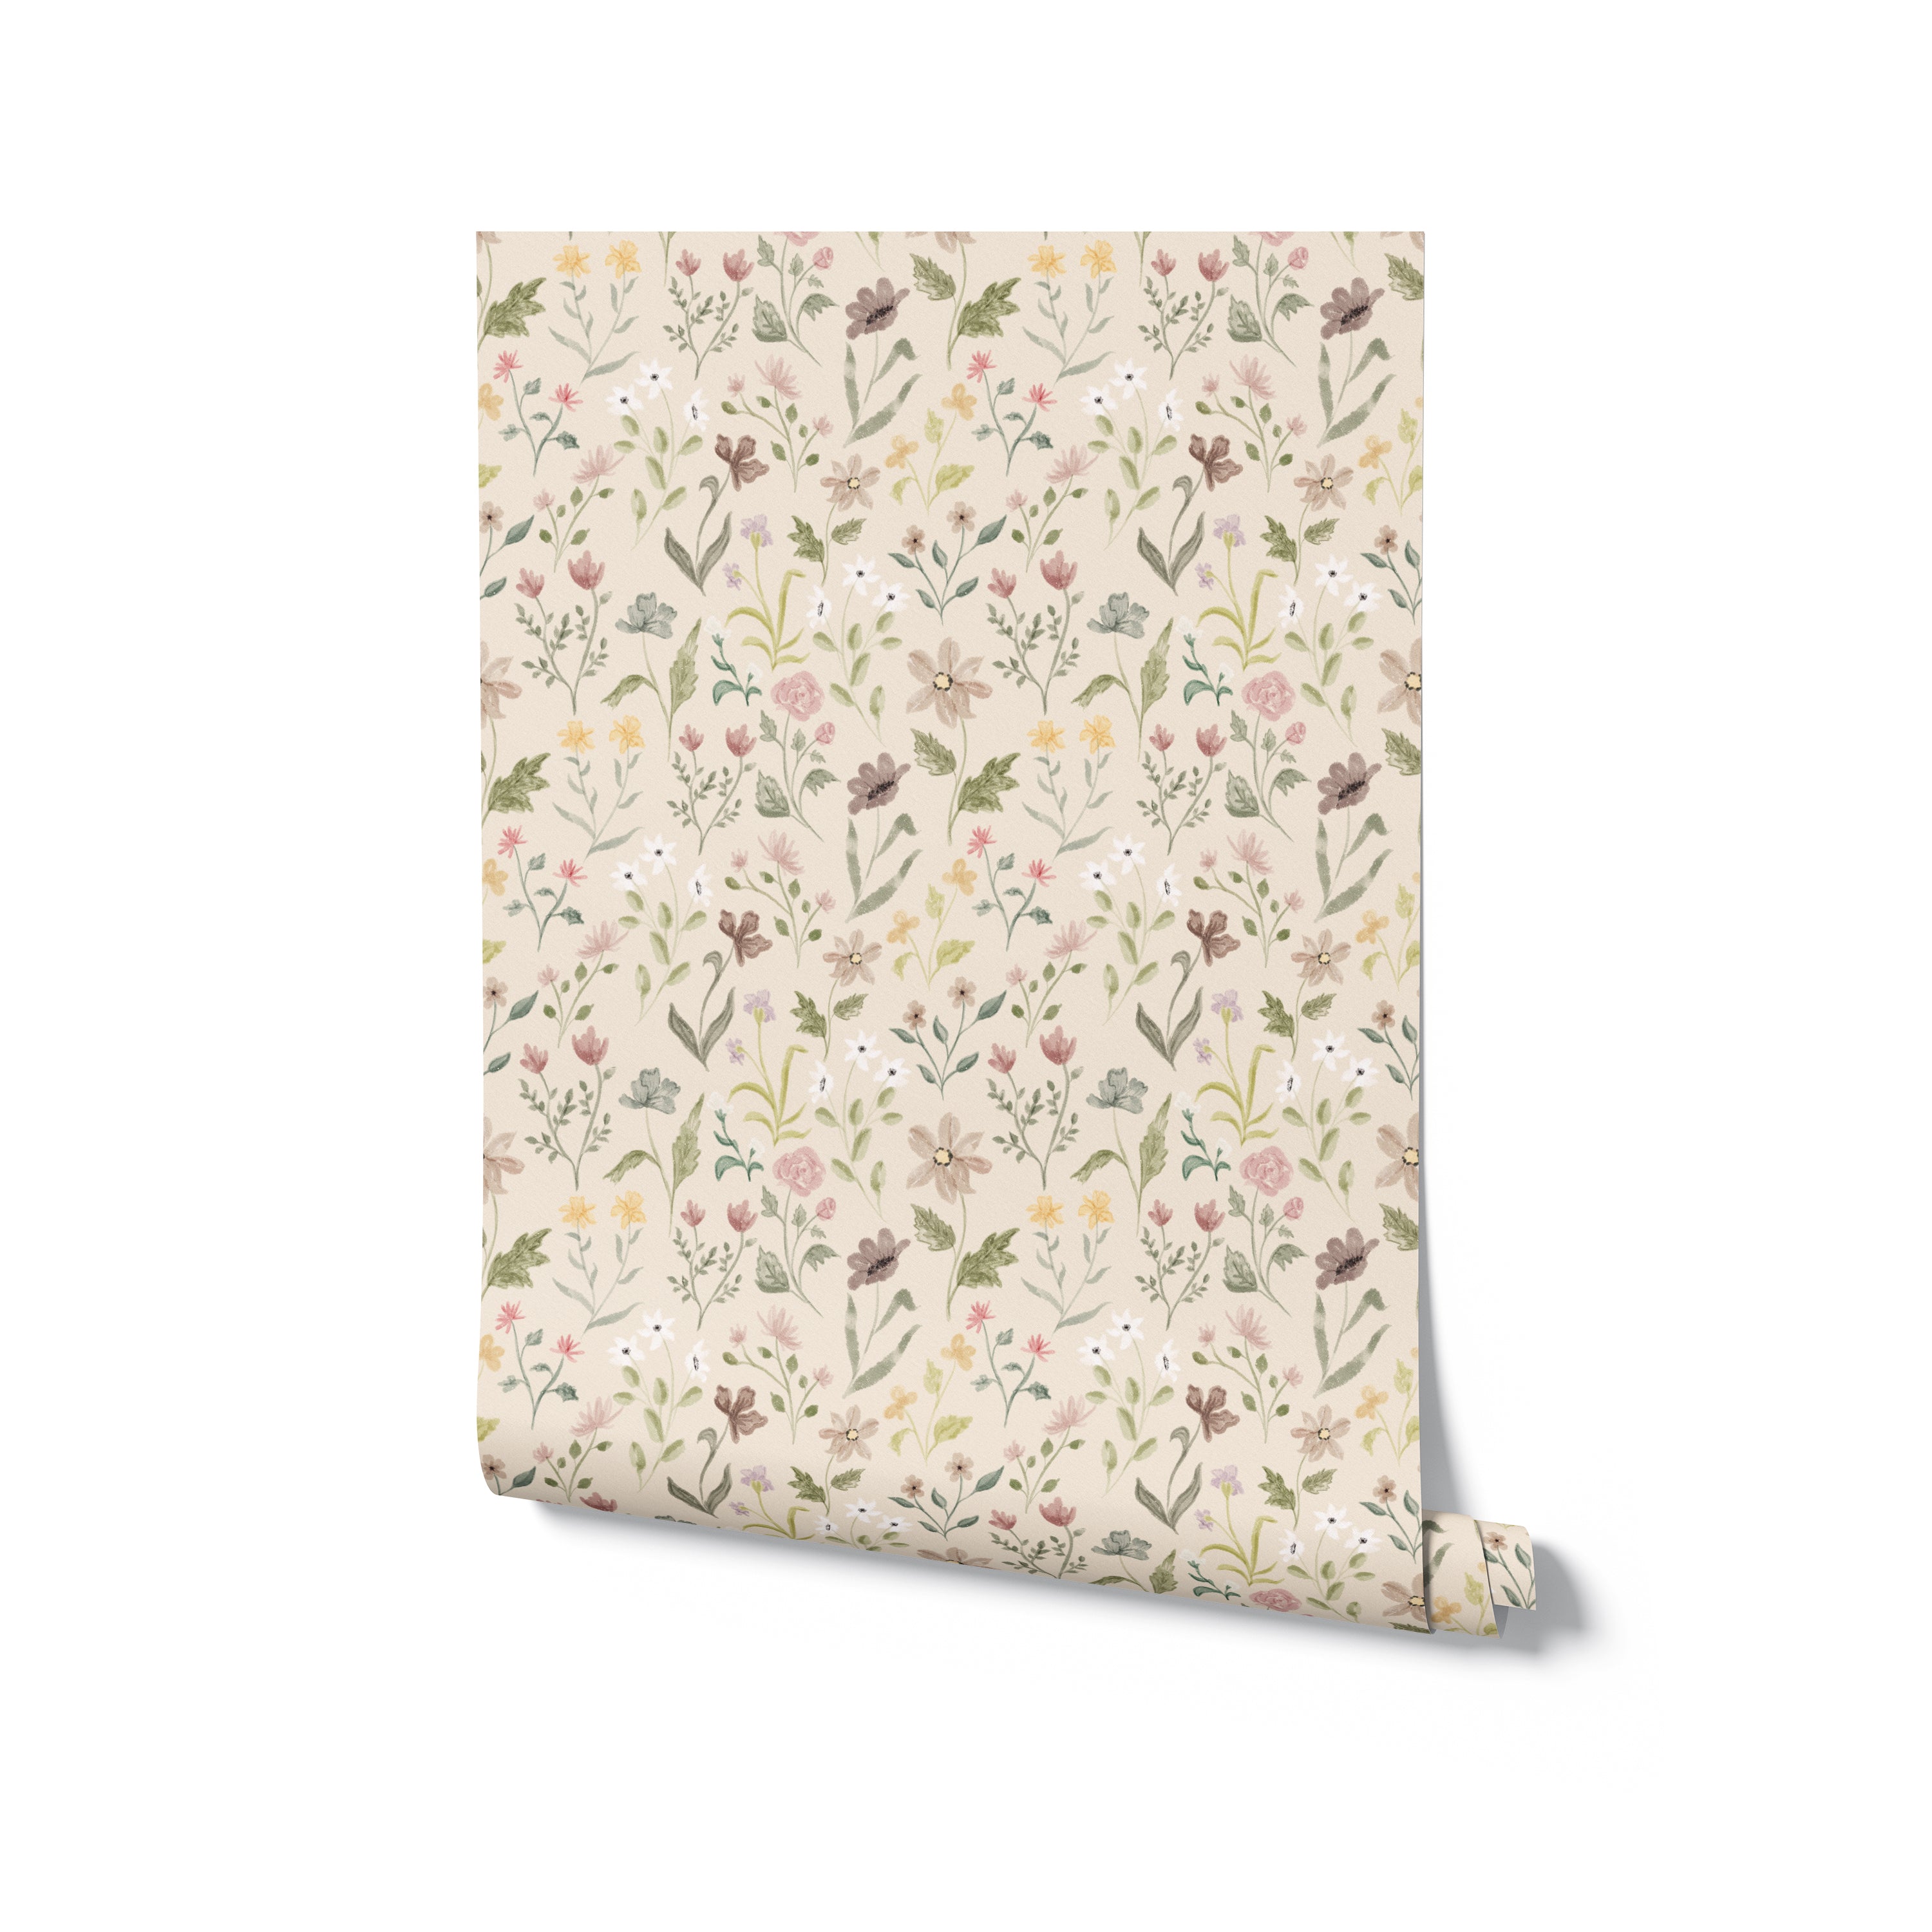 A roll of Whimsy Wildflowers Wallpaper, showing its vibrant and whimsical floral pattern in a mix of soft pastel colors, perfect for adding a touch of playfulness to any room.